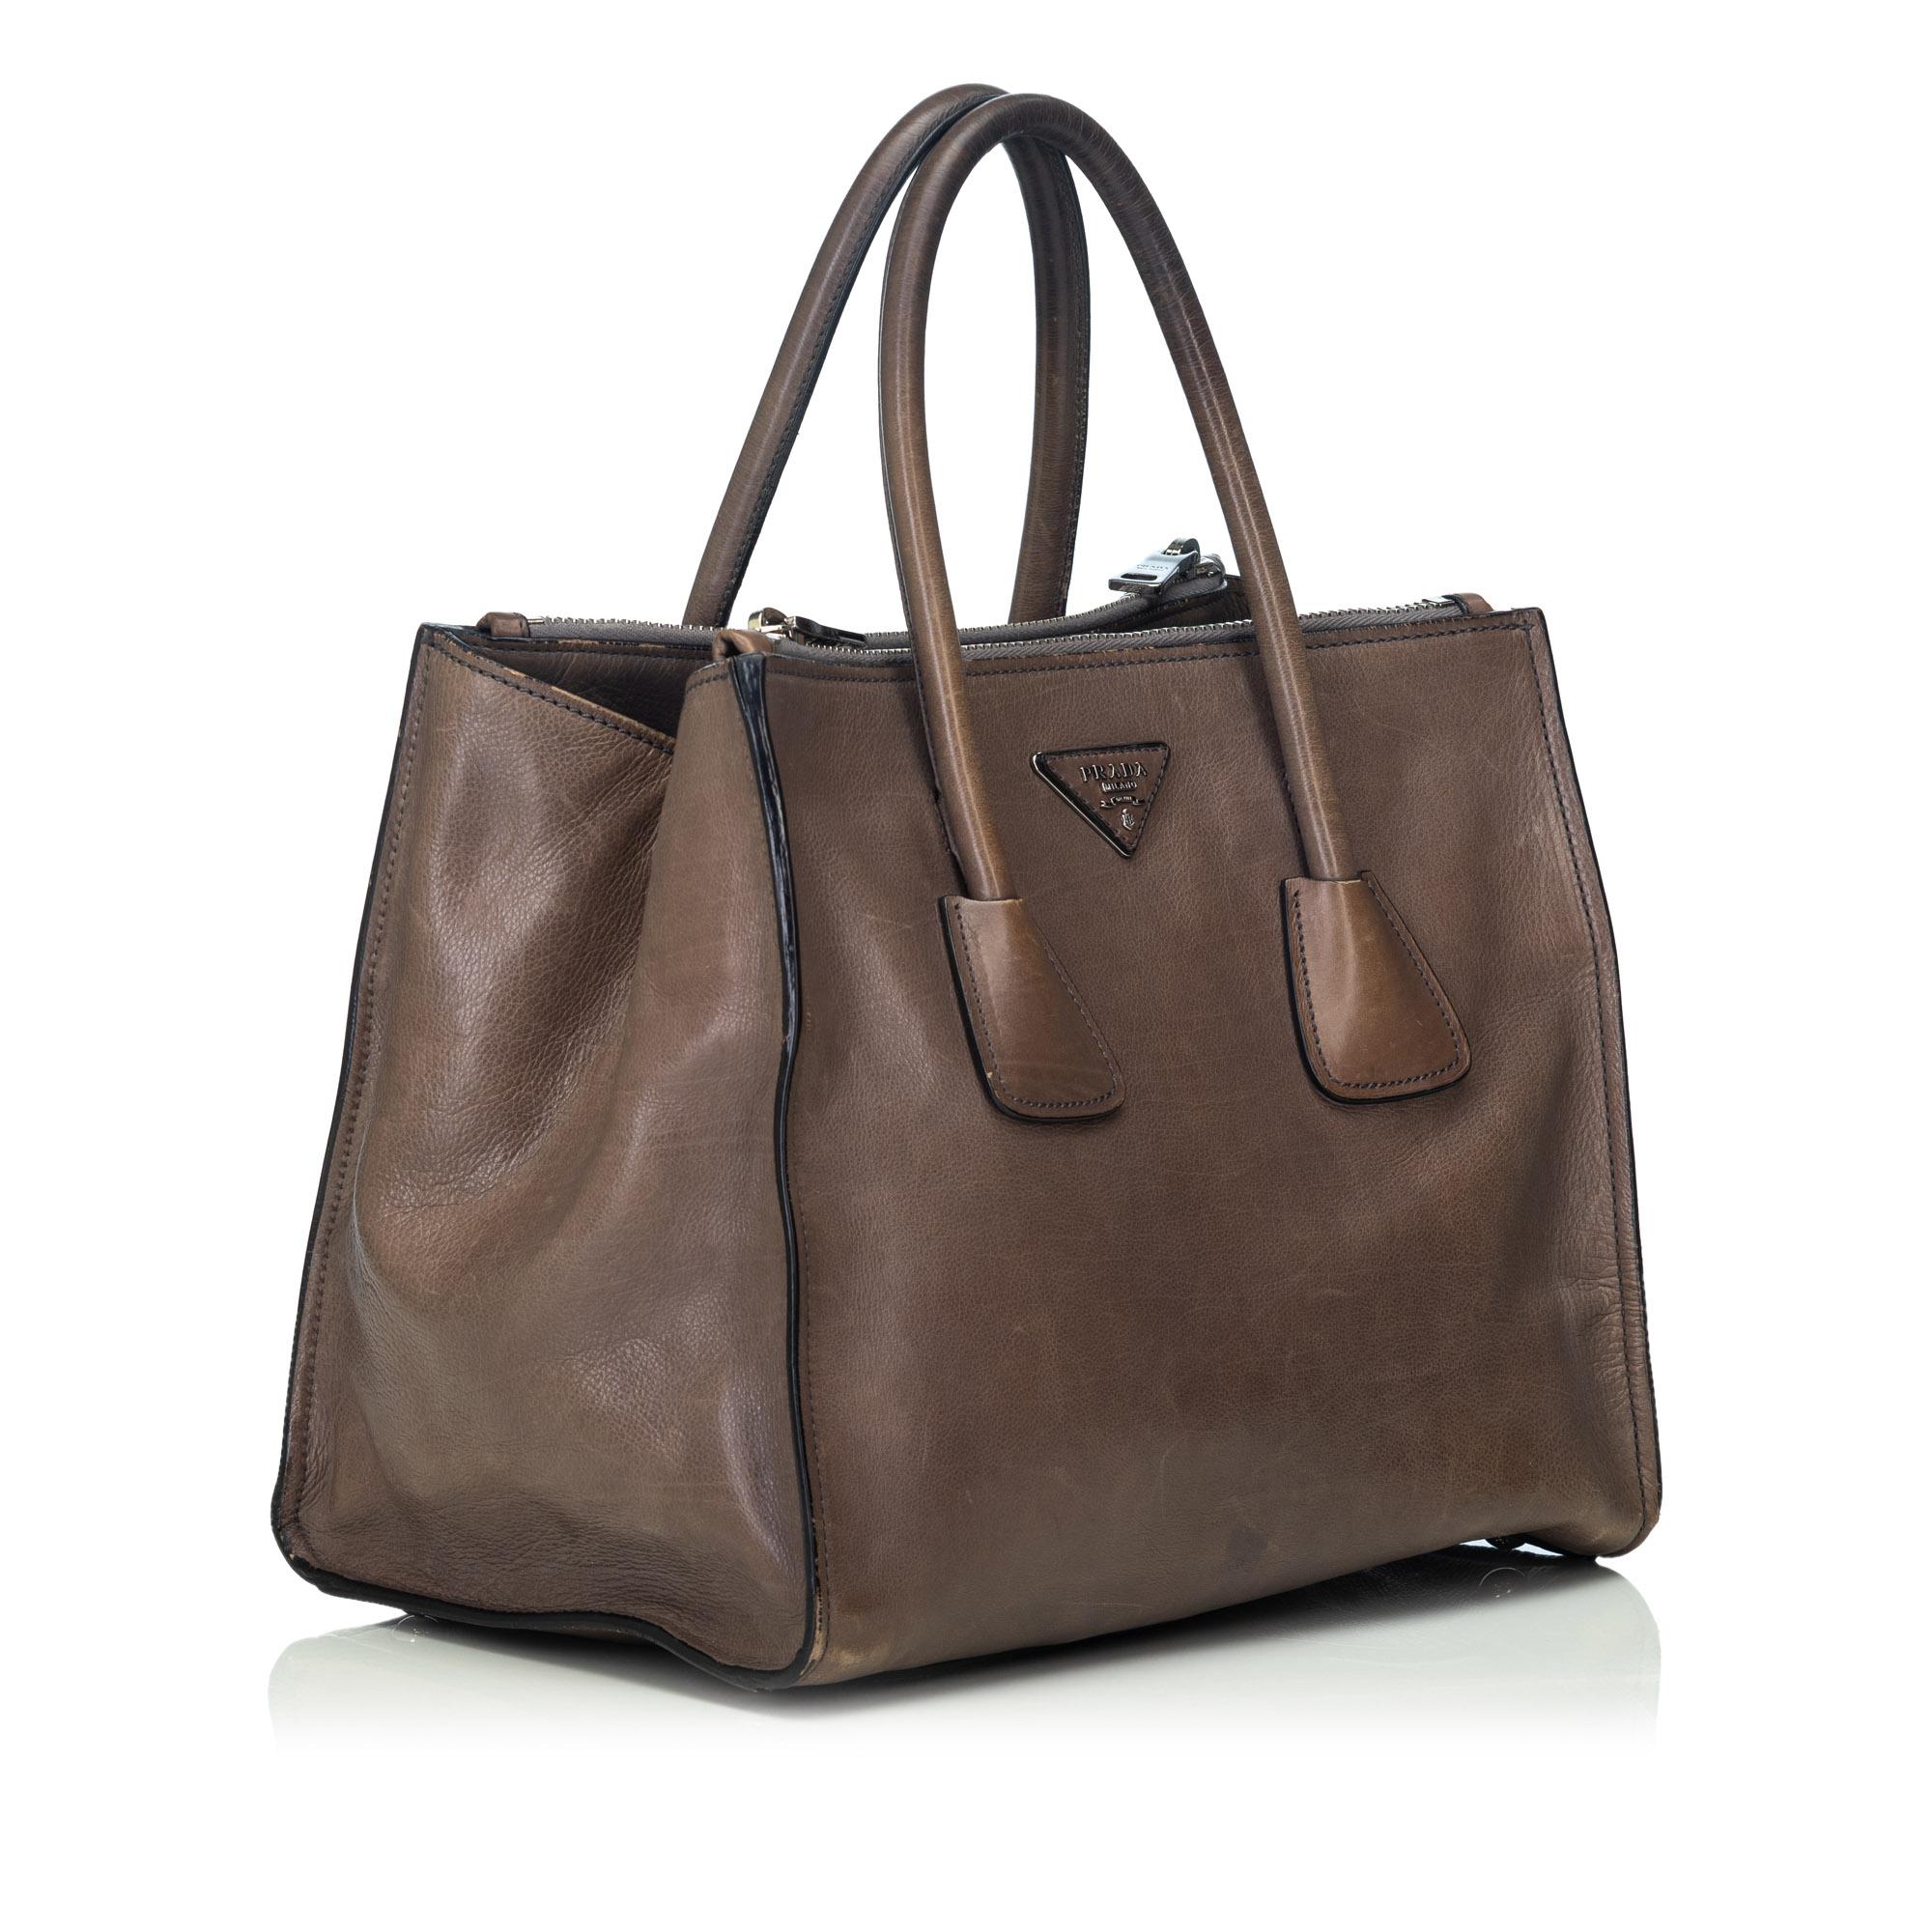 The Twin satchel features a calf leather body, rolled leather handles, a detachable flat leather strap, an open top with magnetic snap button closure, top interior zip compartments, and interior zip pockets. It carries as B condition